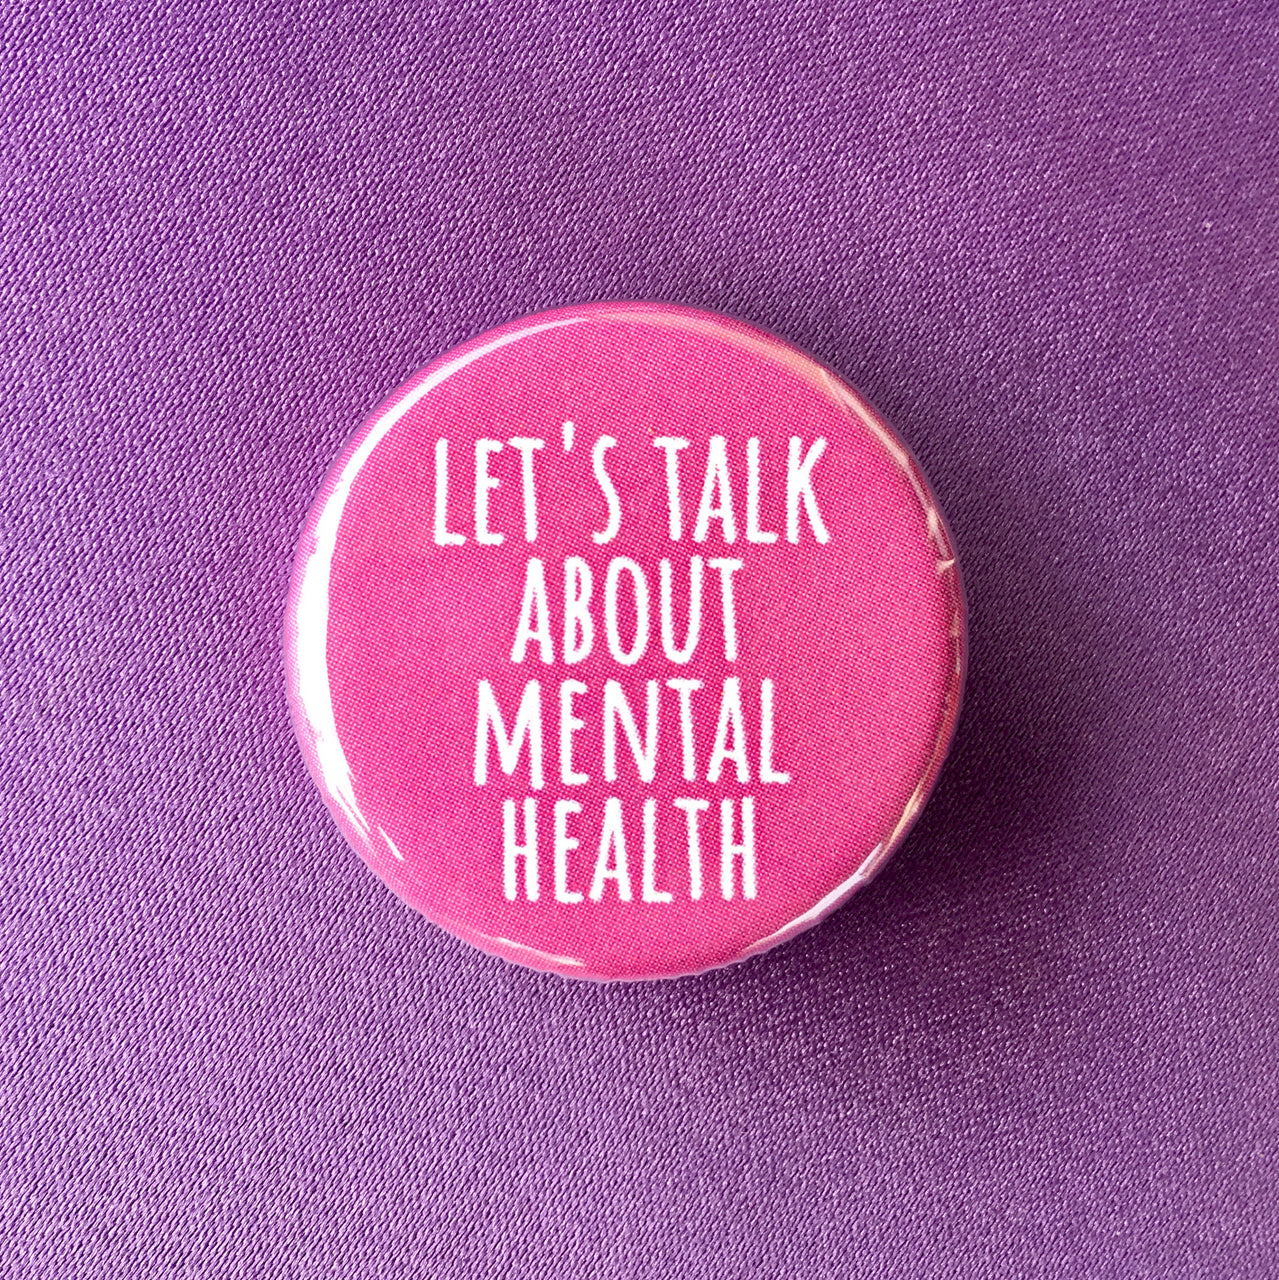 Let’s talk about mental health - Radical Buttons